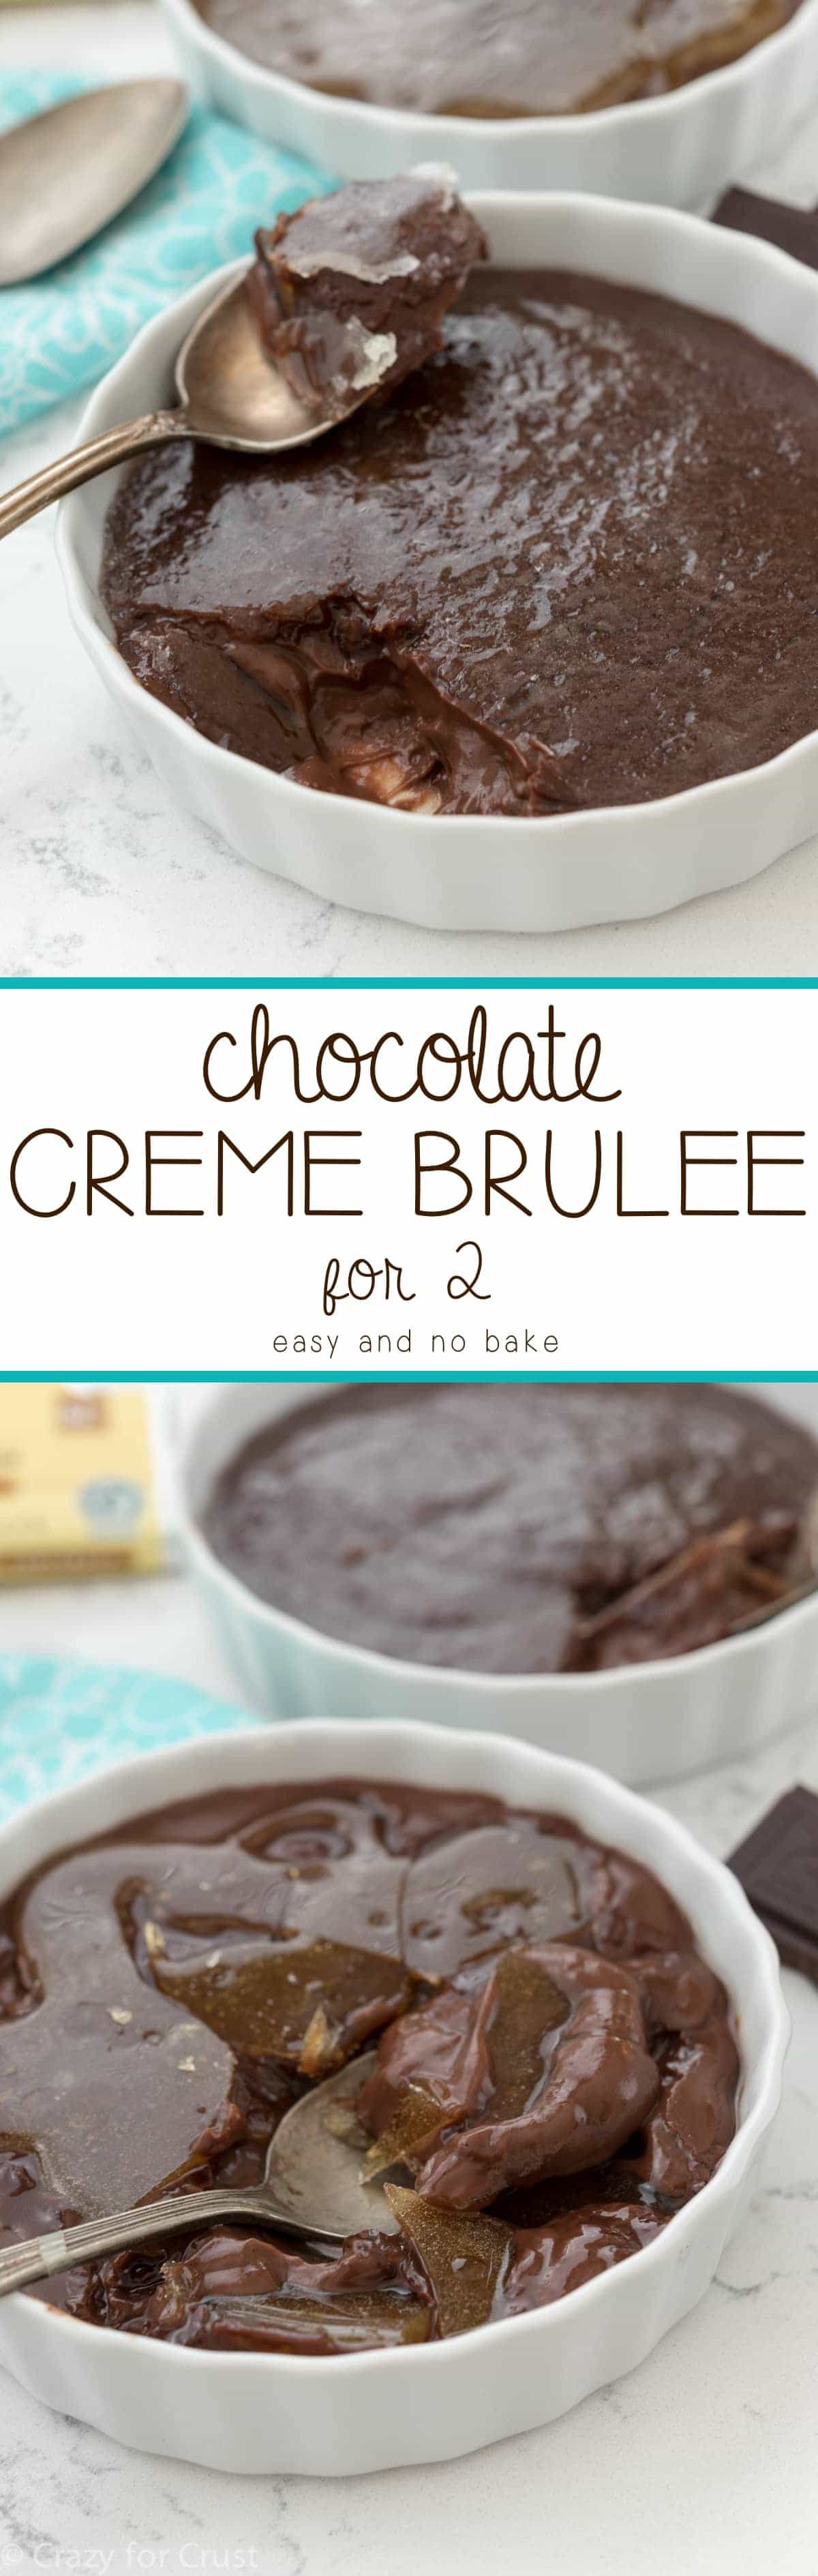 Easy Chocolate Creme Brulee for 2! This simple recipe is totally foolproof - it's no bake! No oven, no eggs - just chocolatey creme brulee!